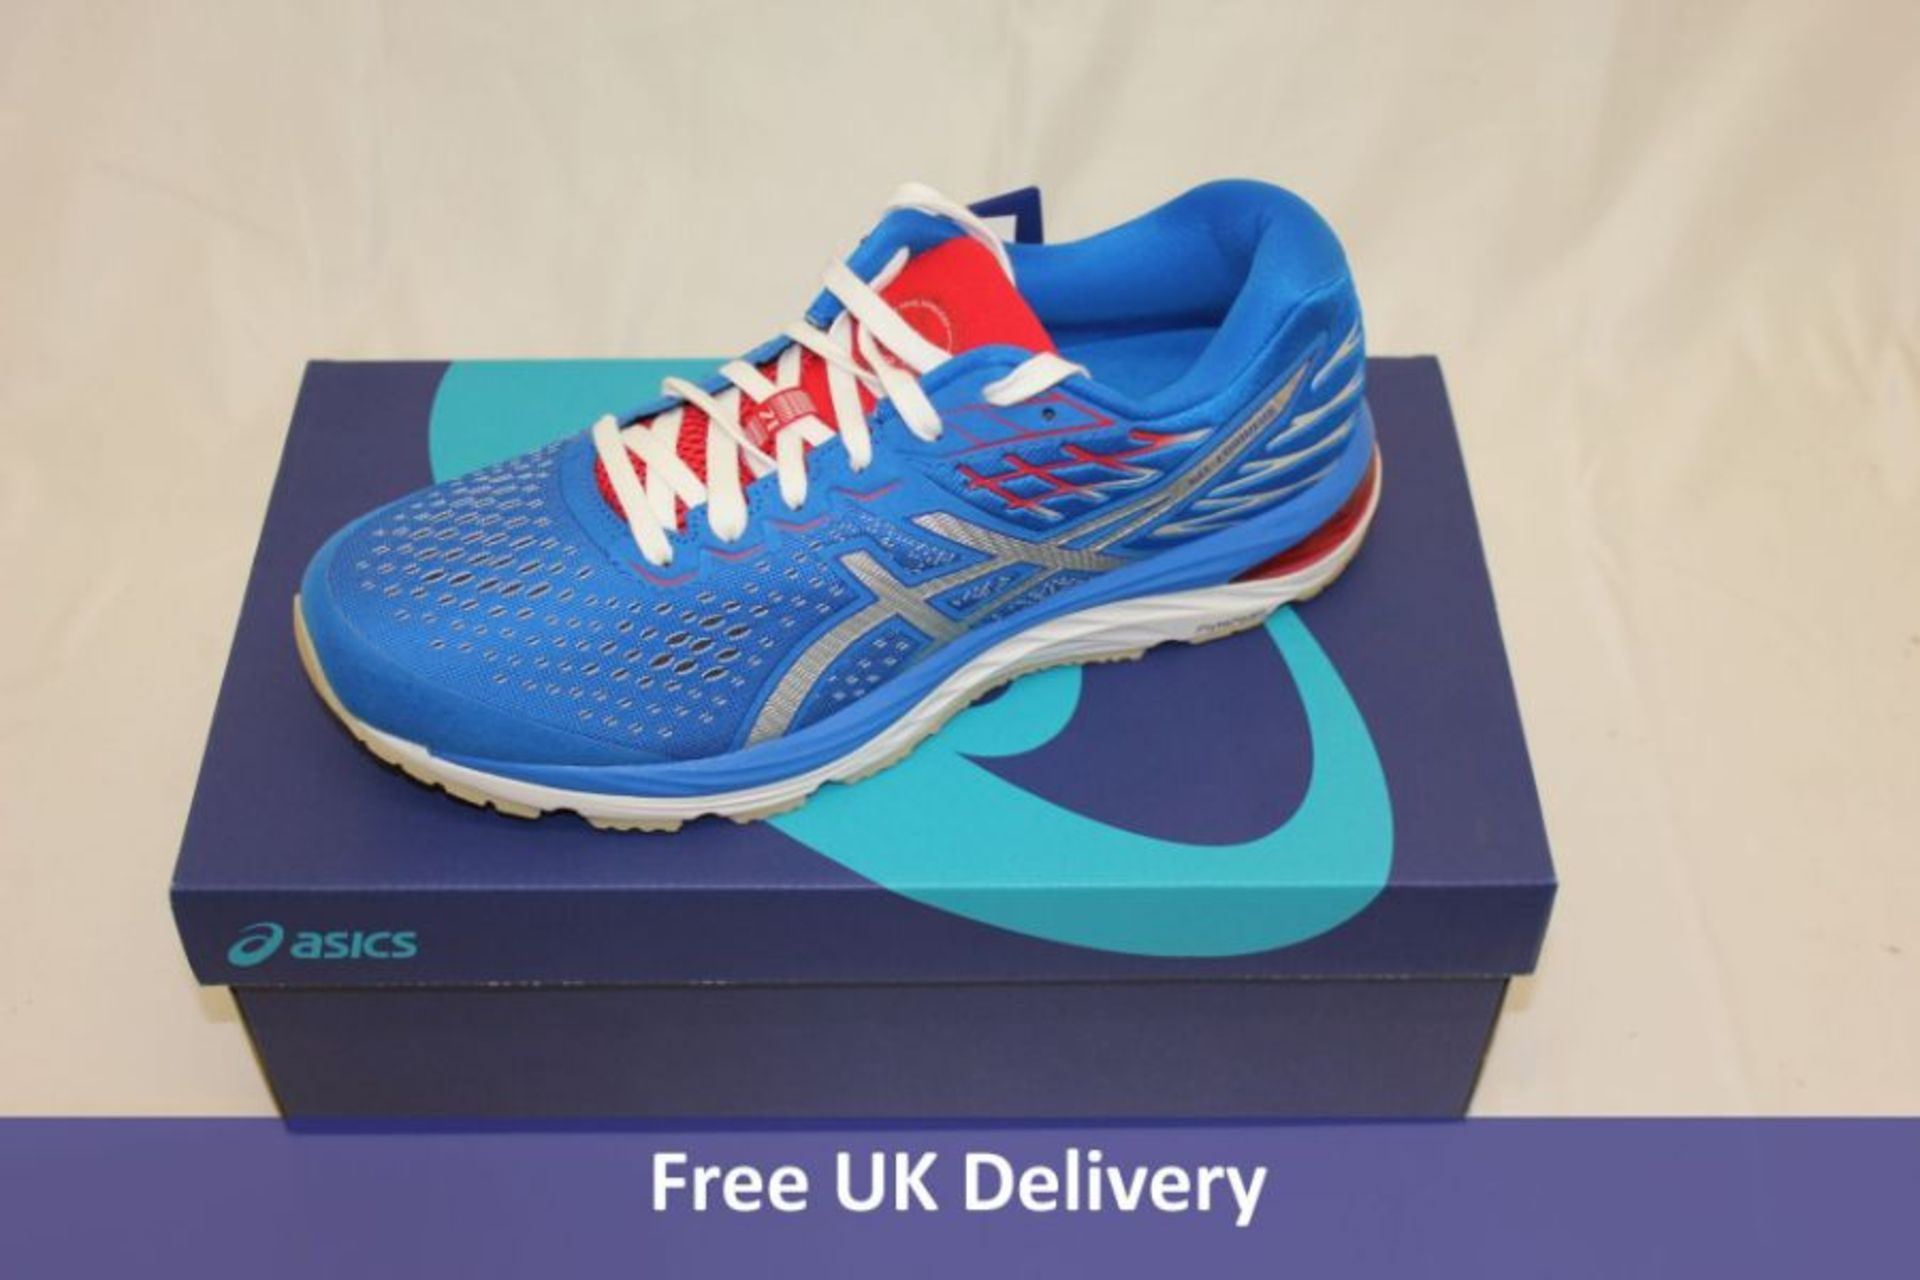 Two Asics Gel Cumulus 21 Men's Trainers to include 1x Electric Blue/White UK 10 and 1x Piedmont Grey - Image 2 of 2